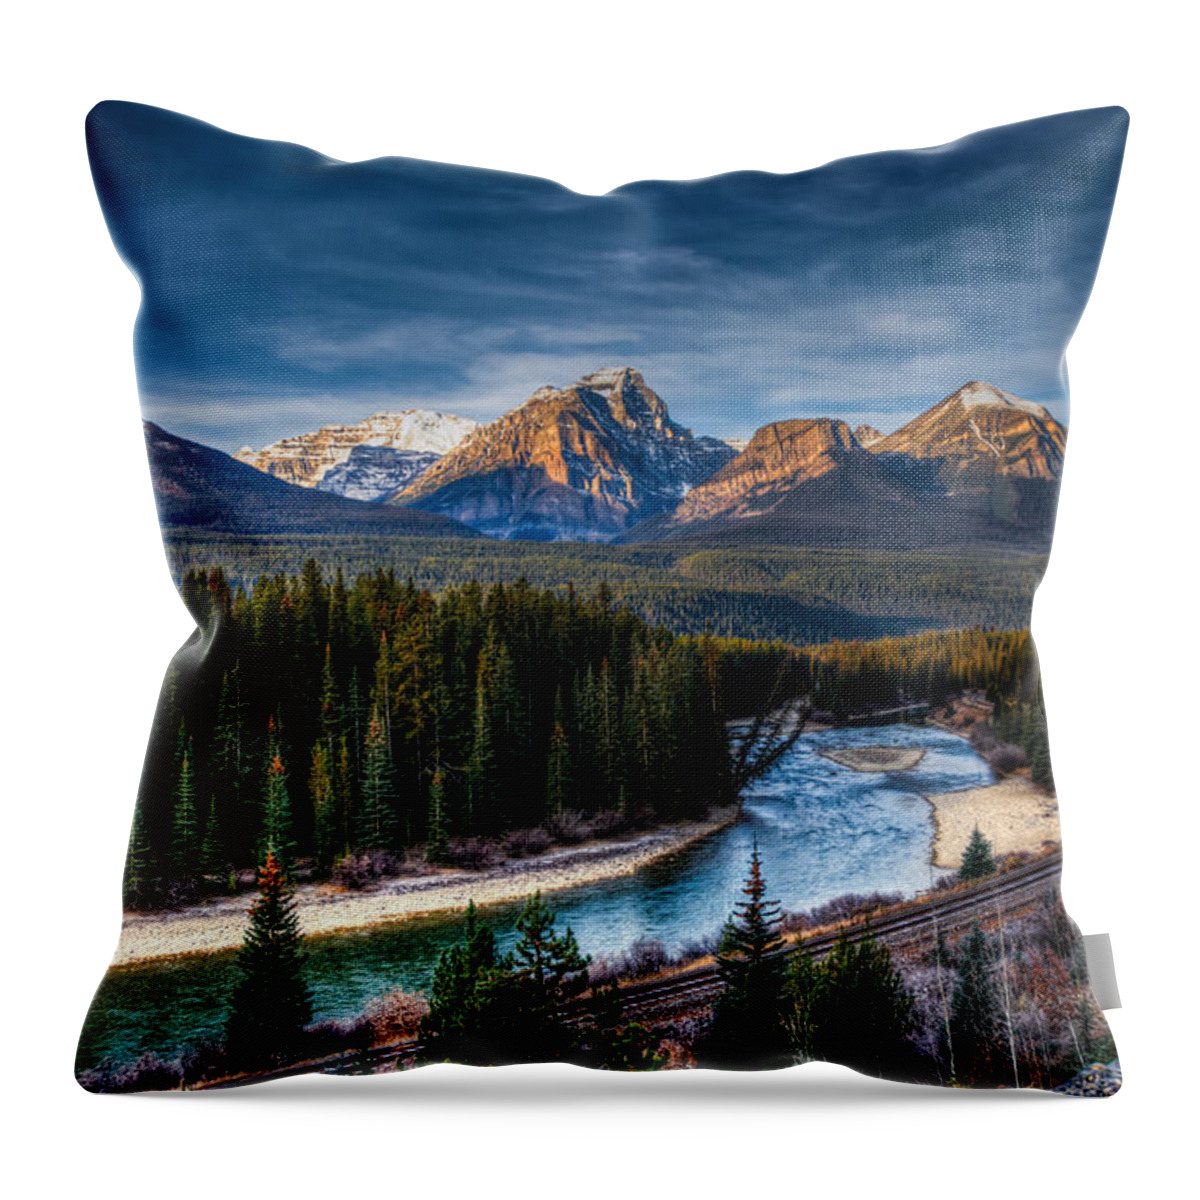 Alberta Canada Throw Pillow featuring the photograph Morant's Curve by Brandon Smith